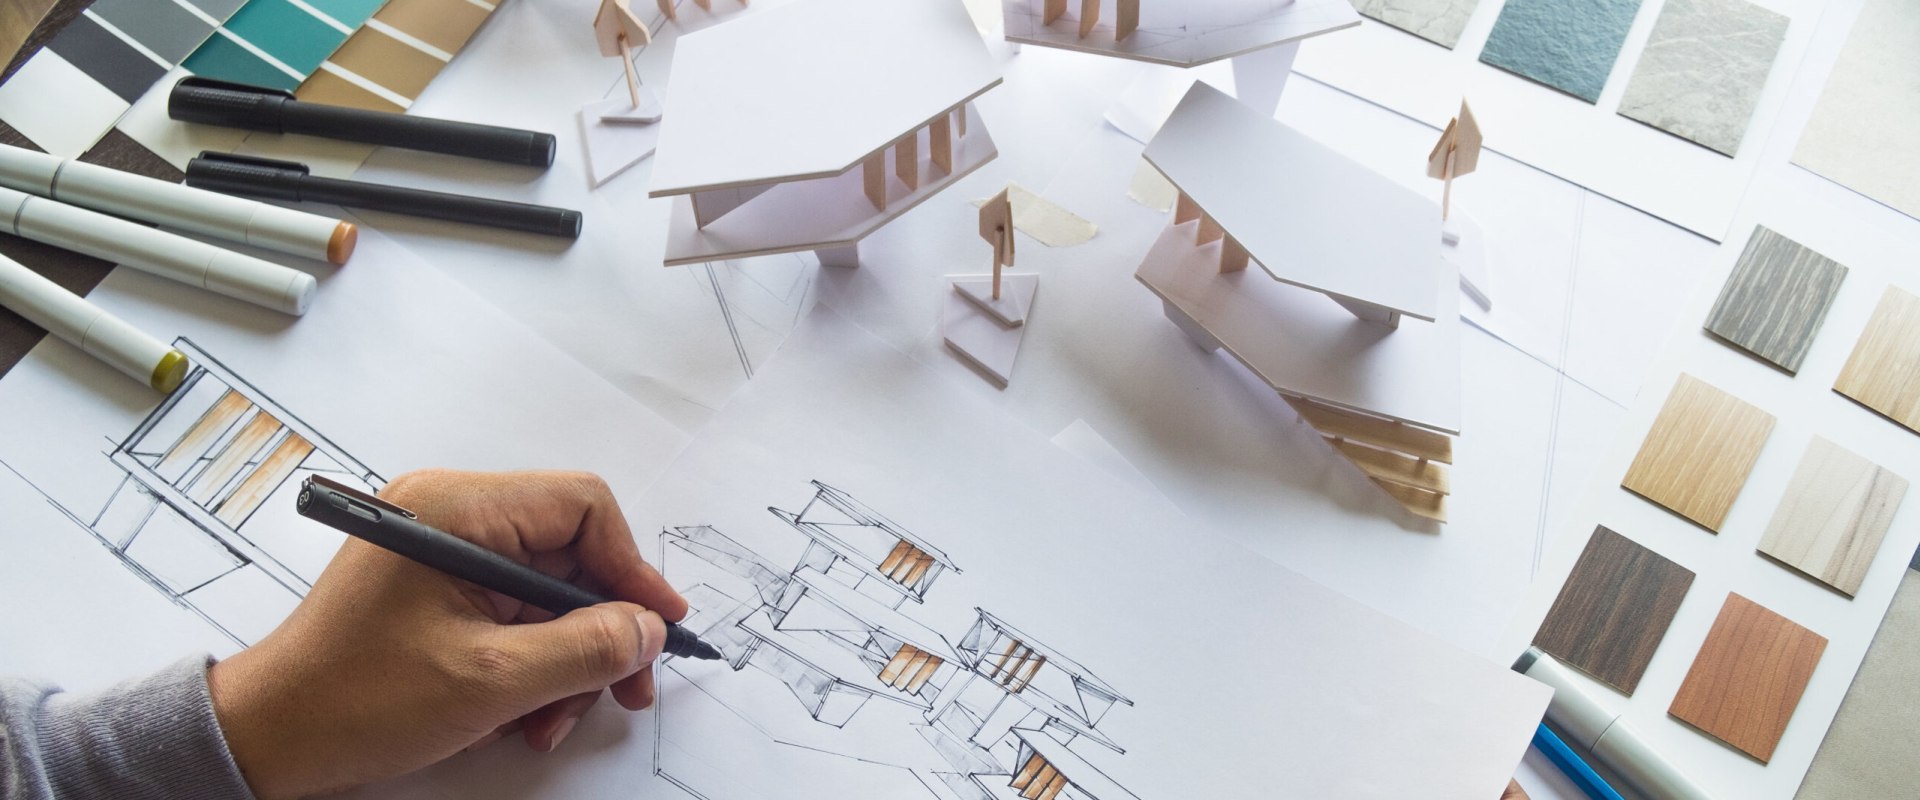 What can an architectural engineer do?